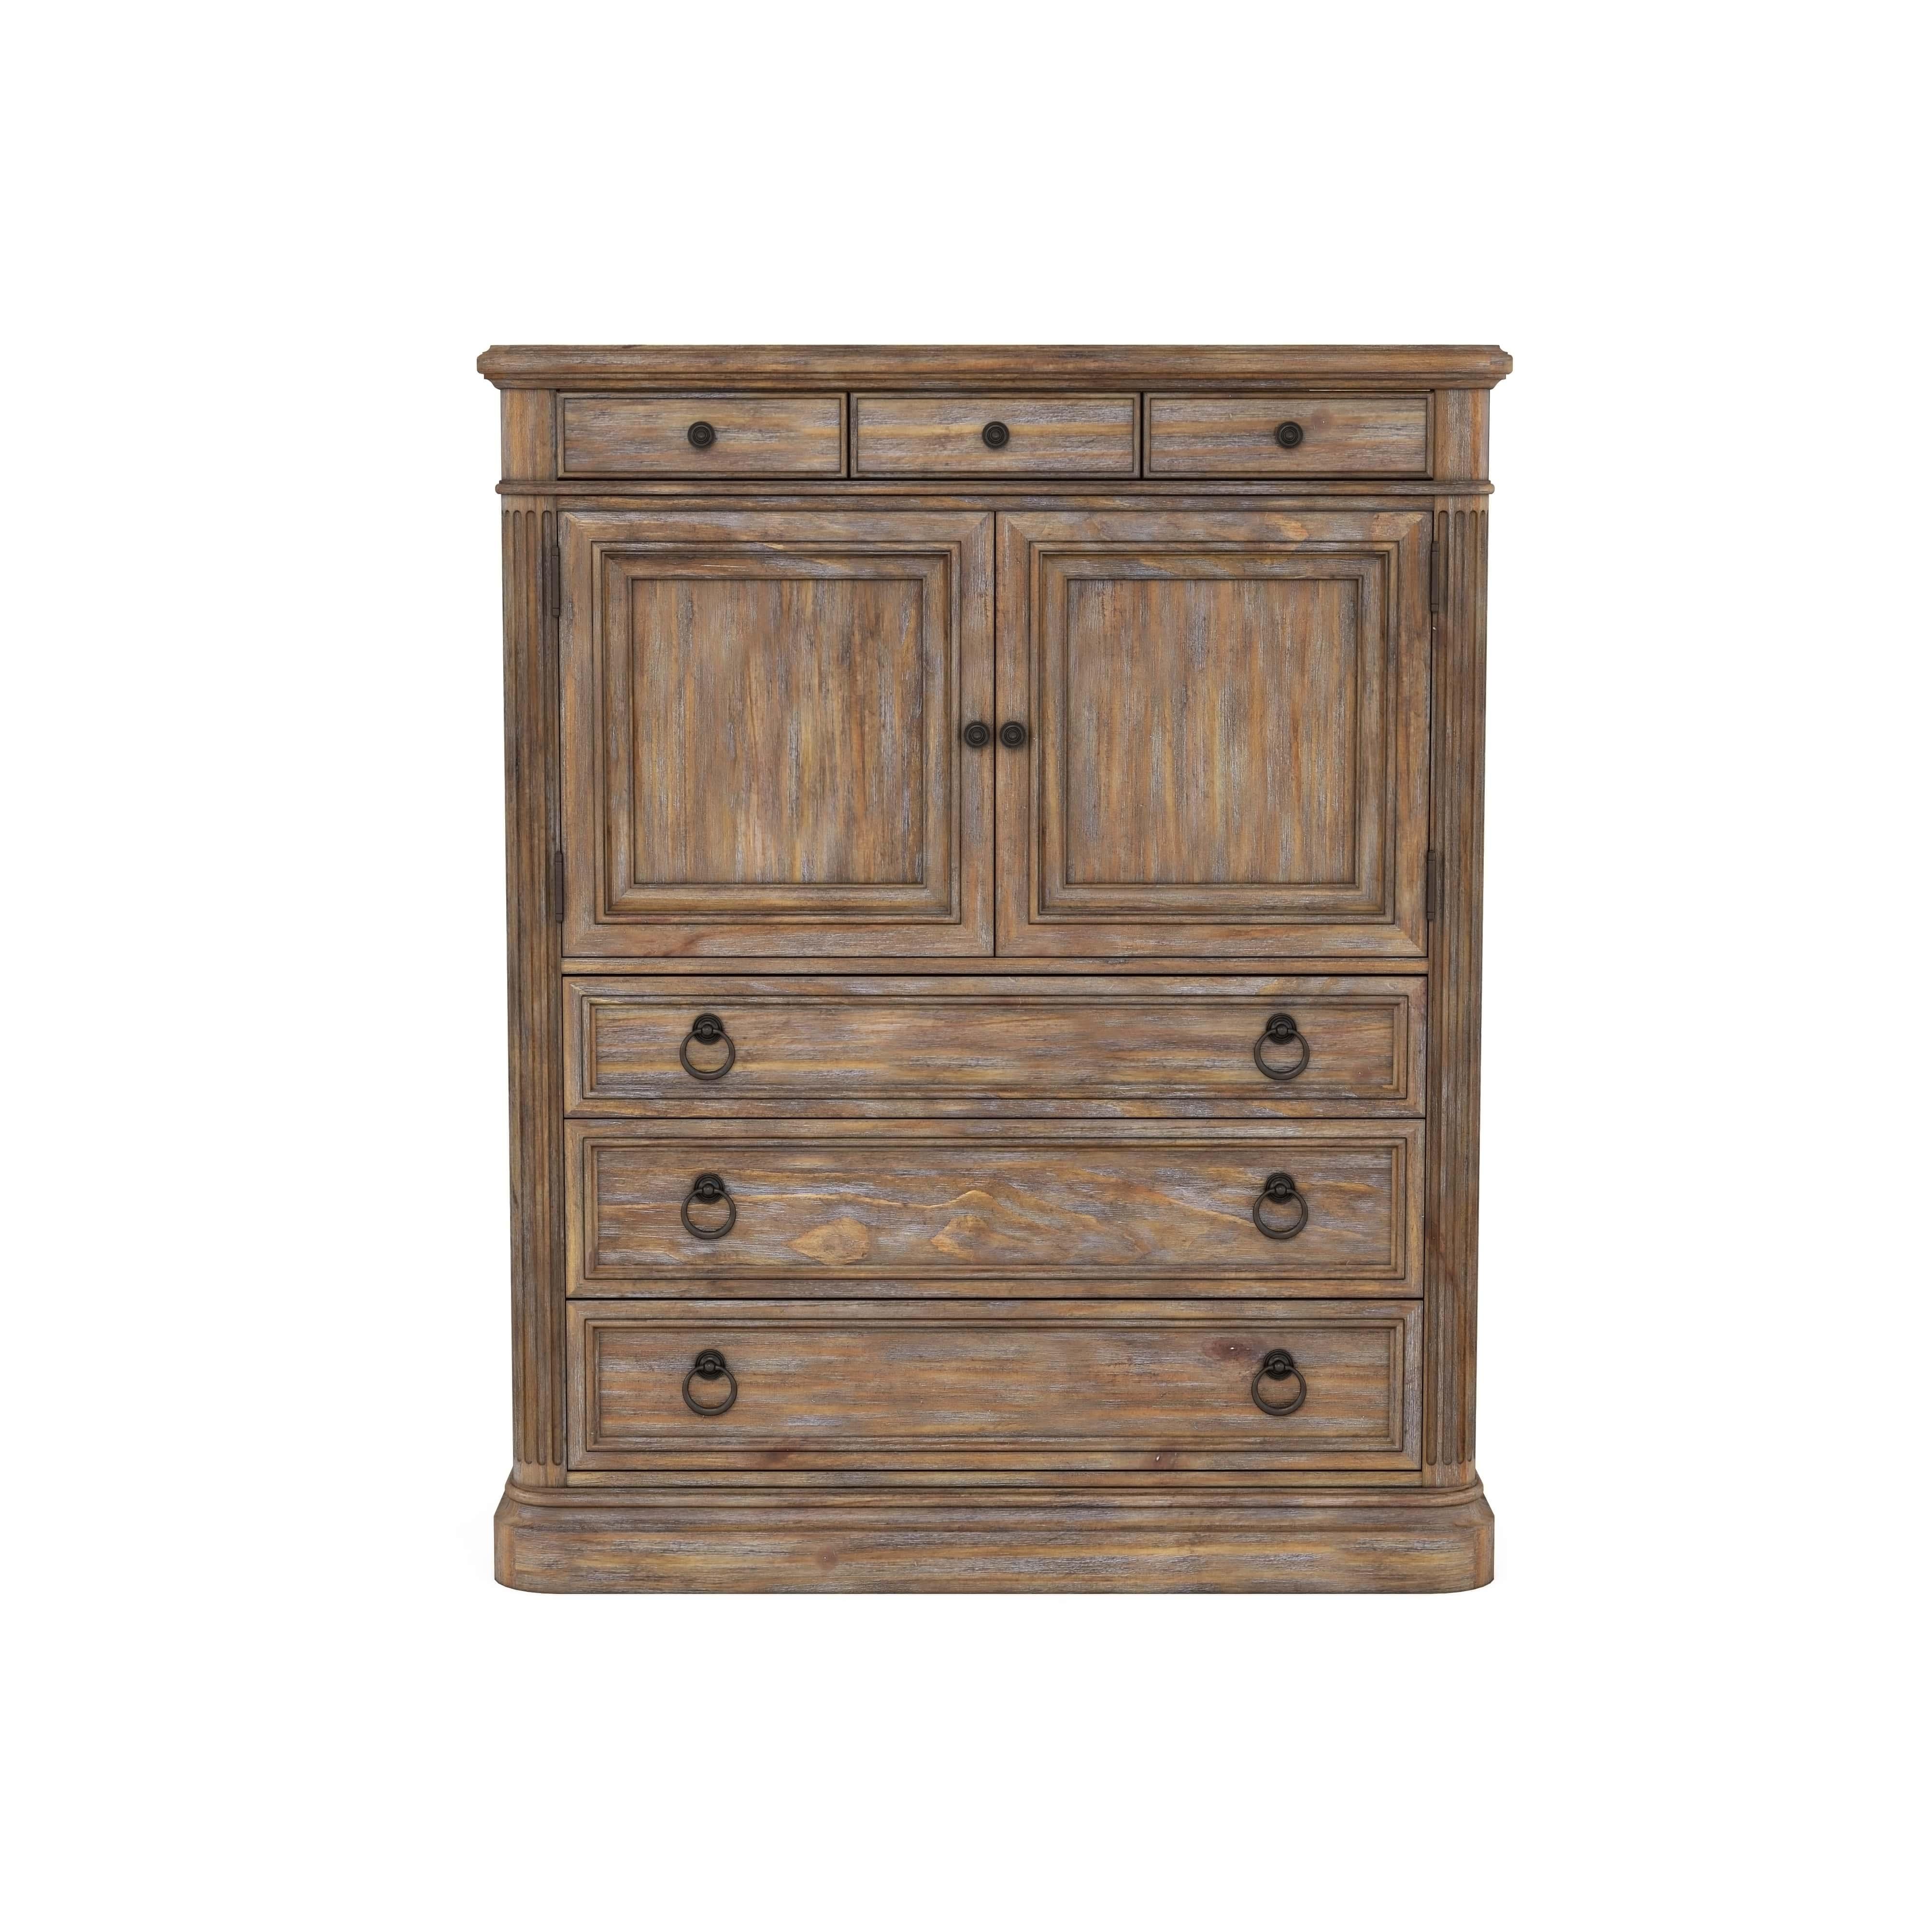 Traditional, Farmhouse Chest Architrave 277152-2608 in Brown, Beige 